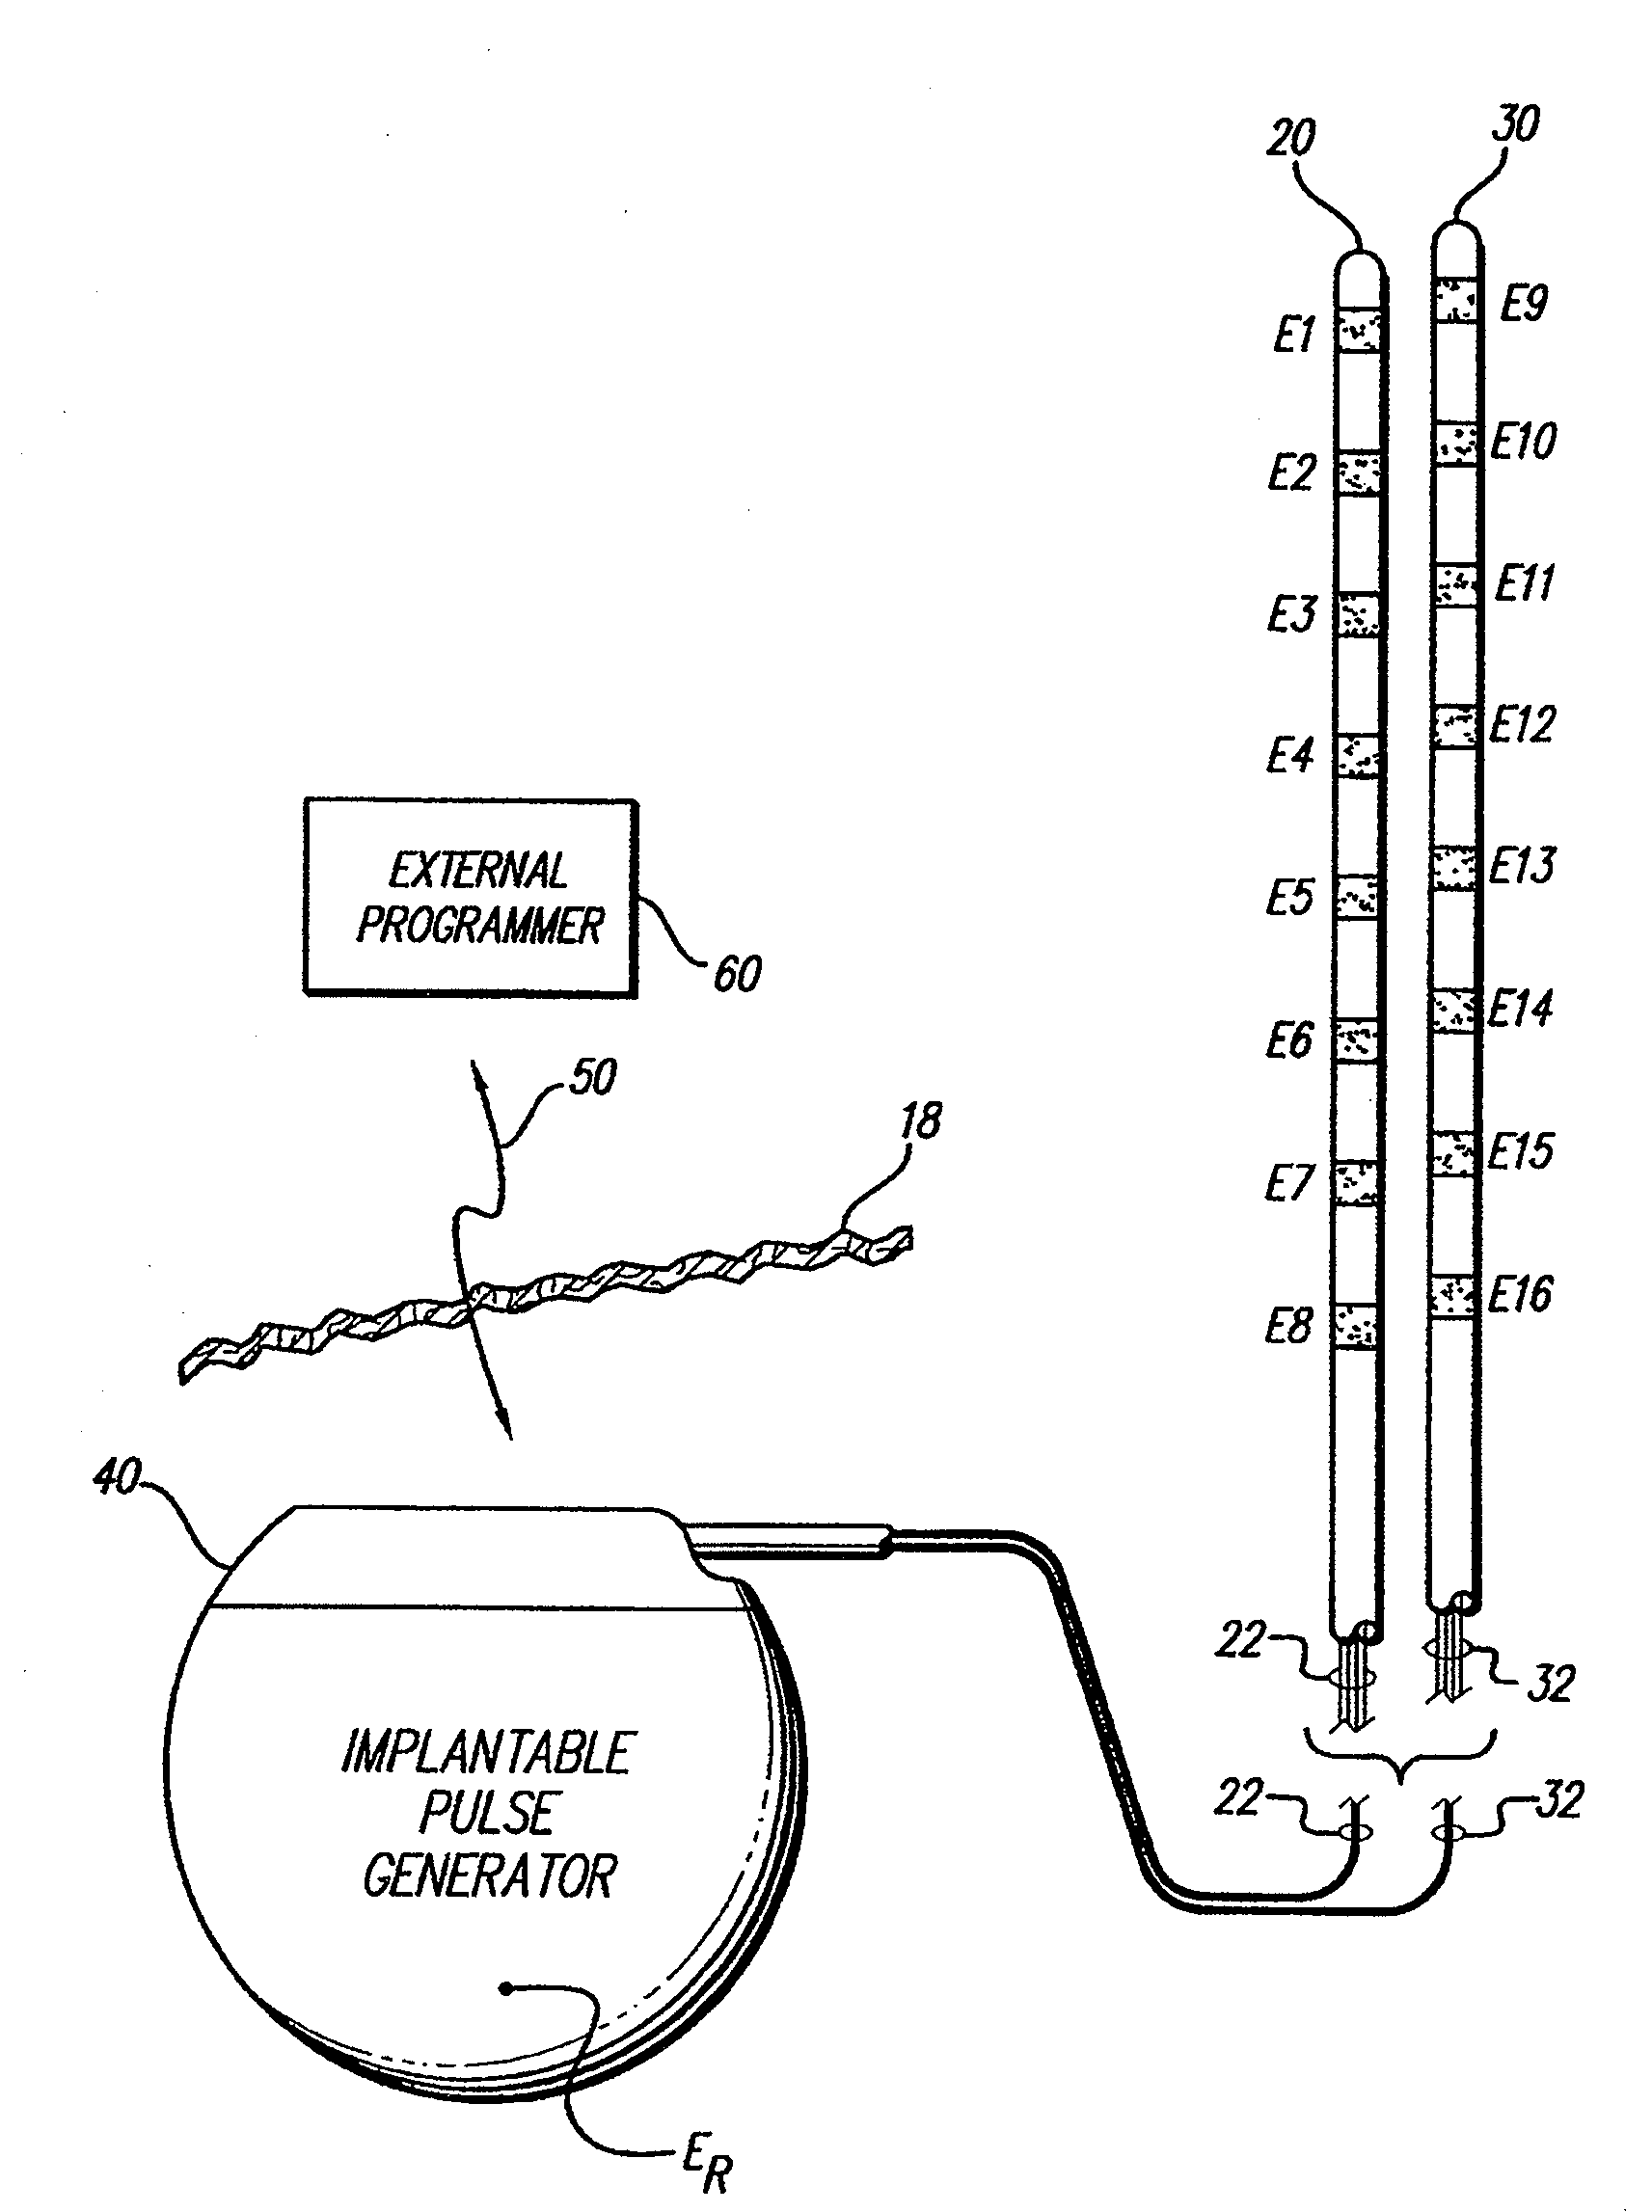 Apparatus and method for determining the relative position and orientation of neurostimulation leads